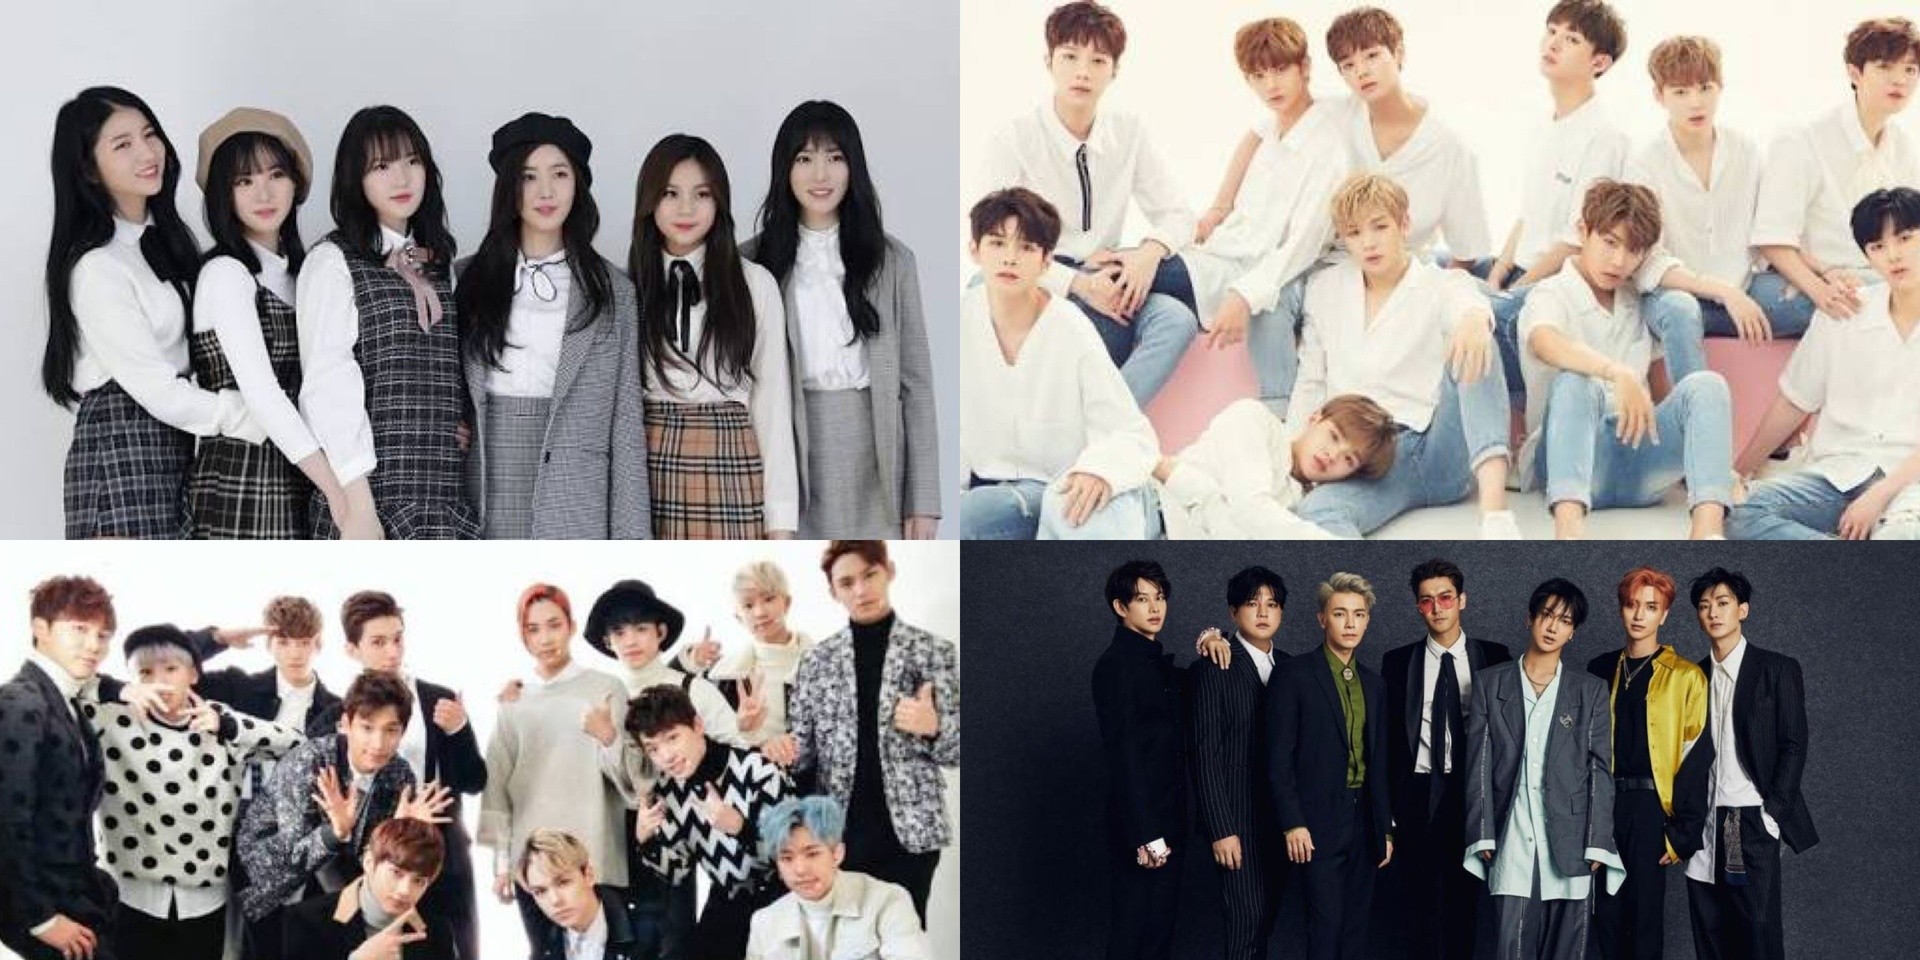 Your guide to the K-pop concerts happening in Manila this 2018